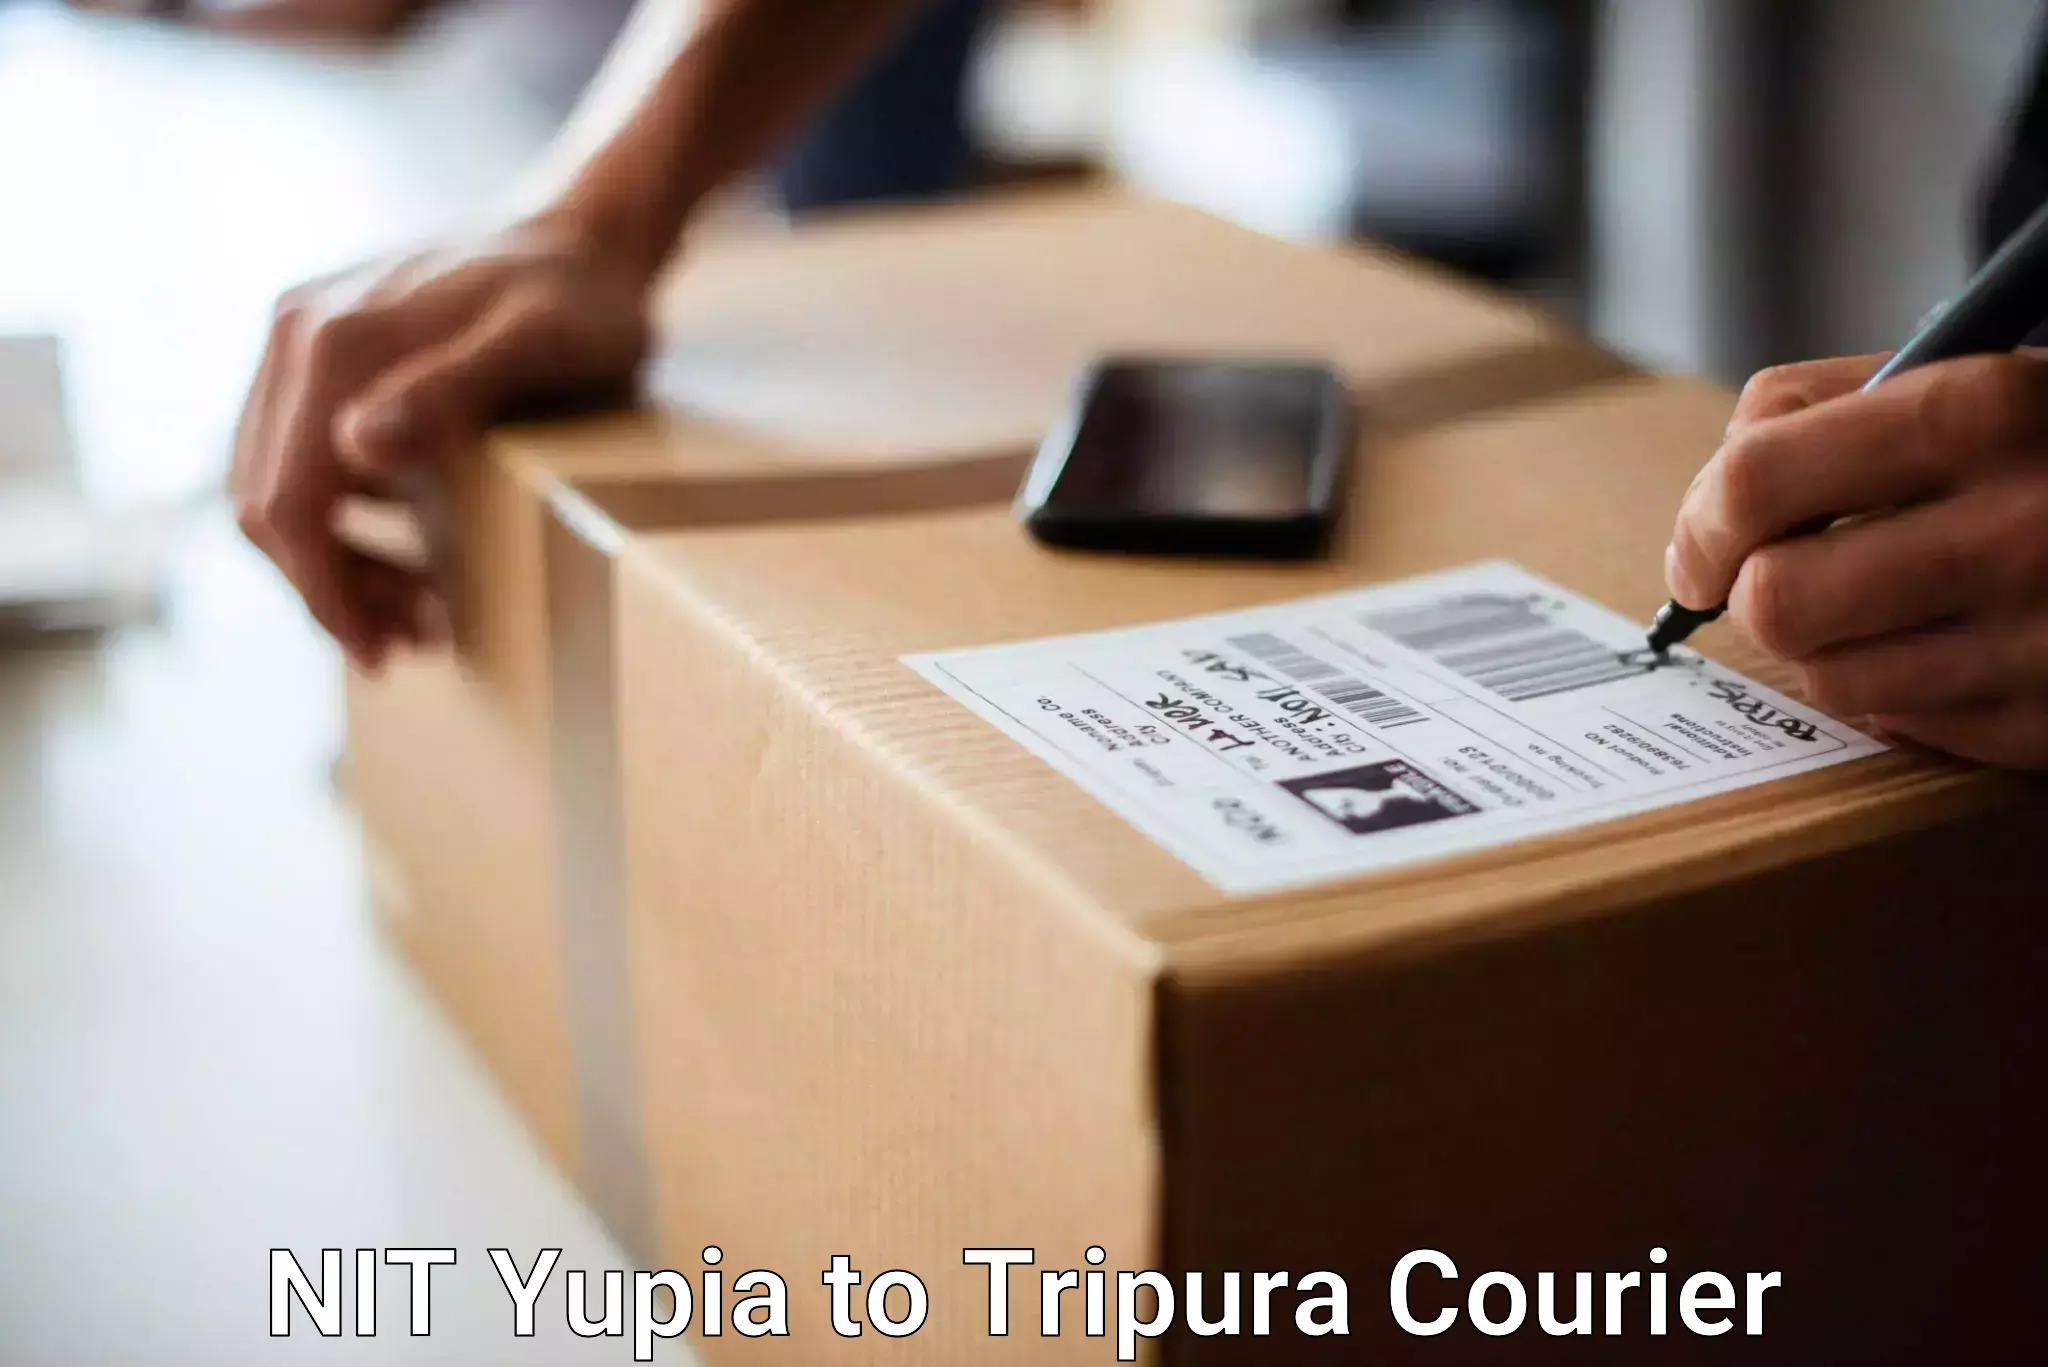 Luggage delivery app NIT Yupia to North Tripura